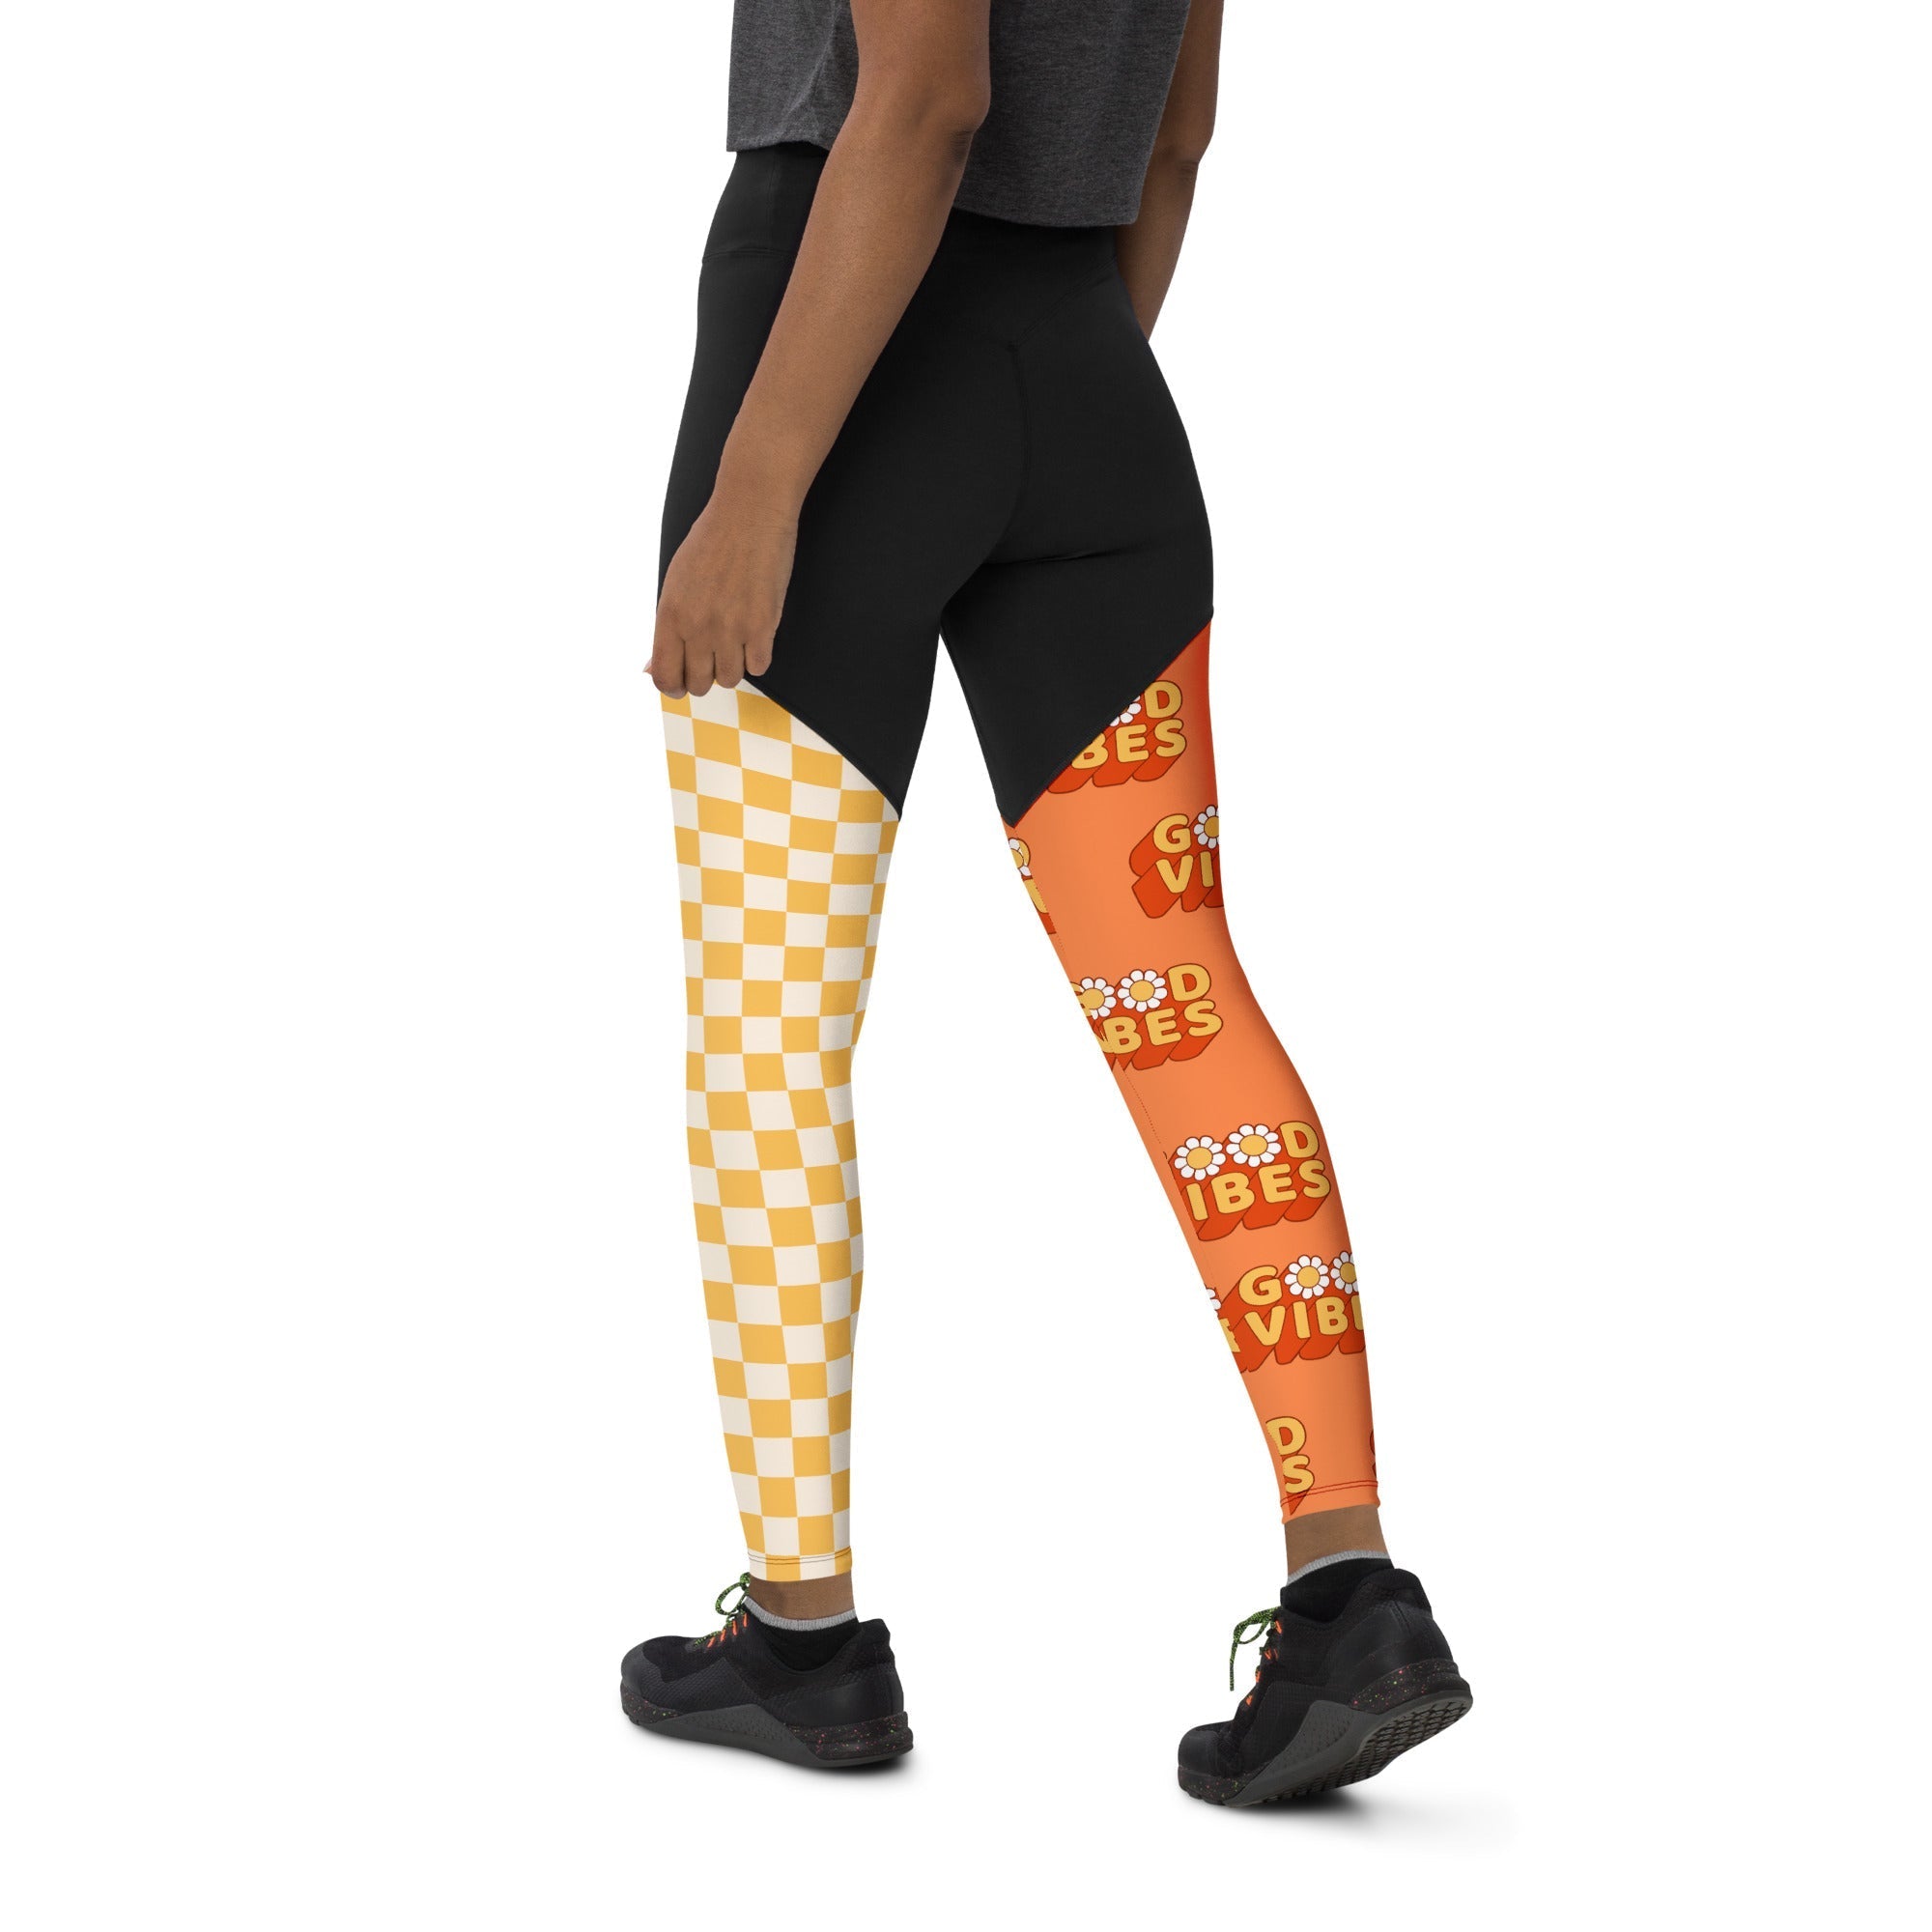 Two Patterned Hippie Compression Leggings